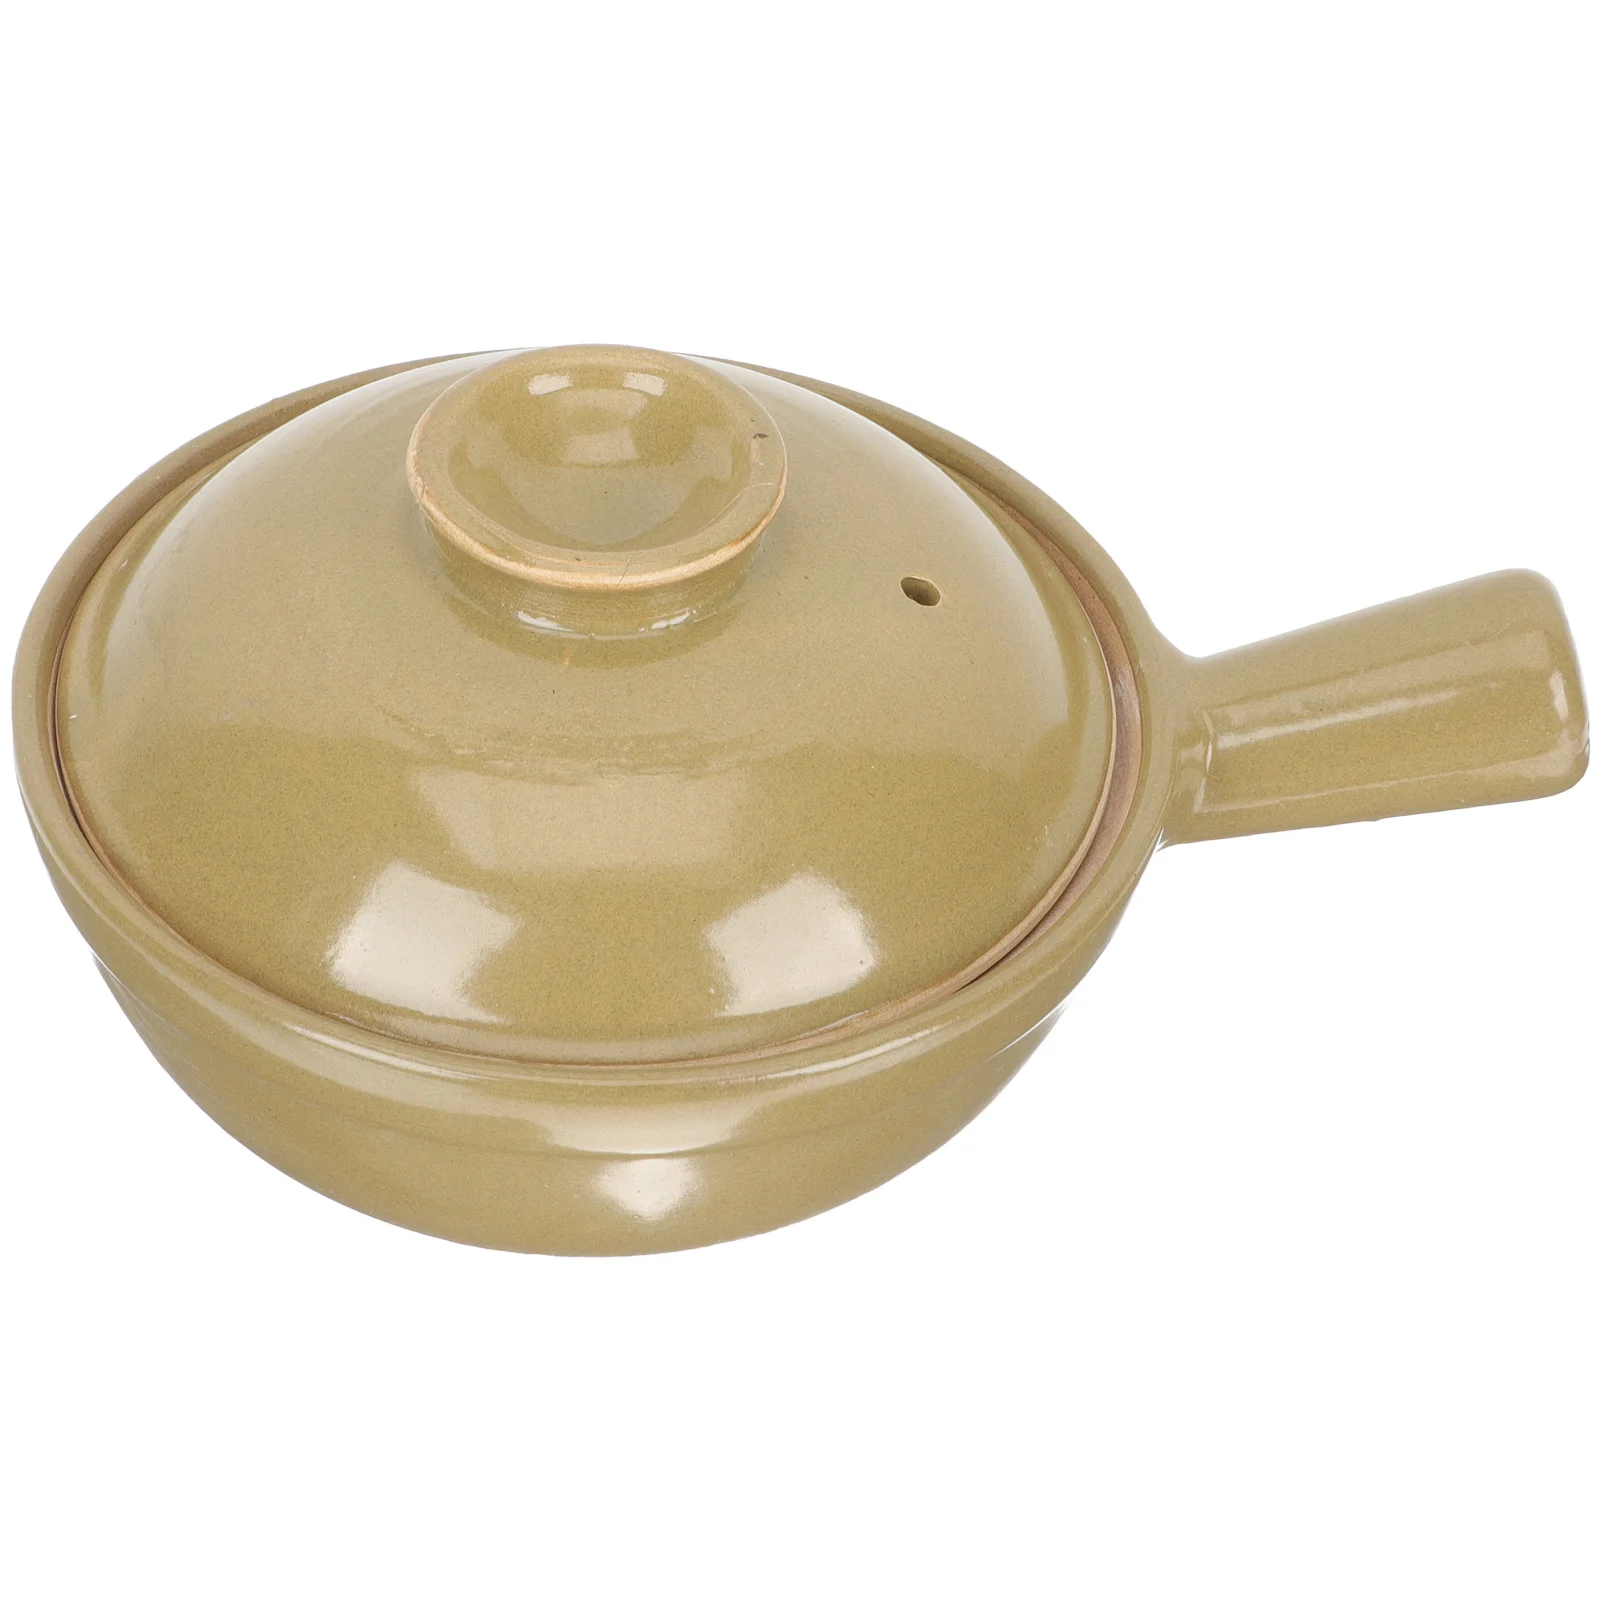 

Pot Casserole Cookingchinese Clay Kitchen Home Kitchenware Stew Pots Household